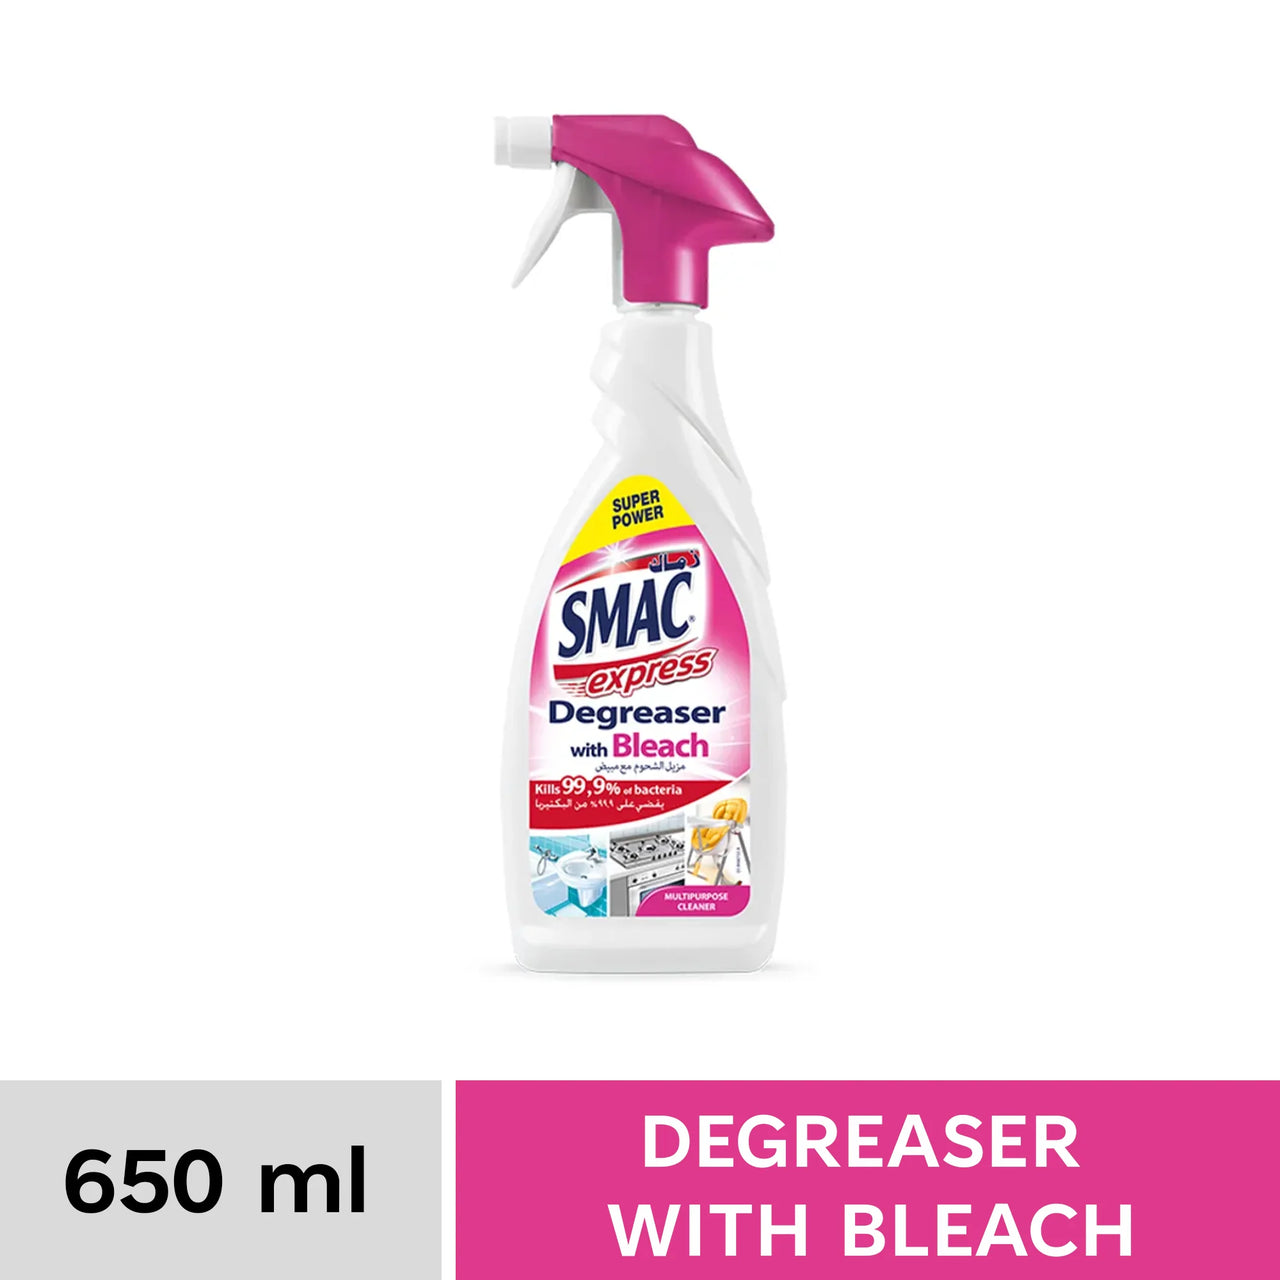 SMAC-Express Degreaser With Bleach-650ml